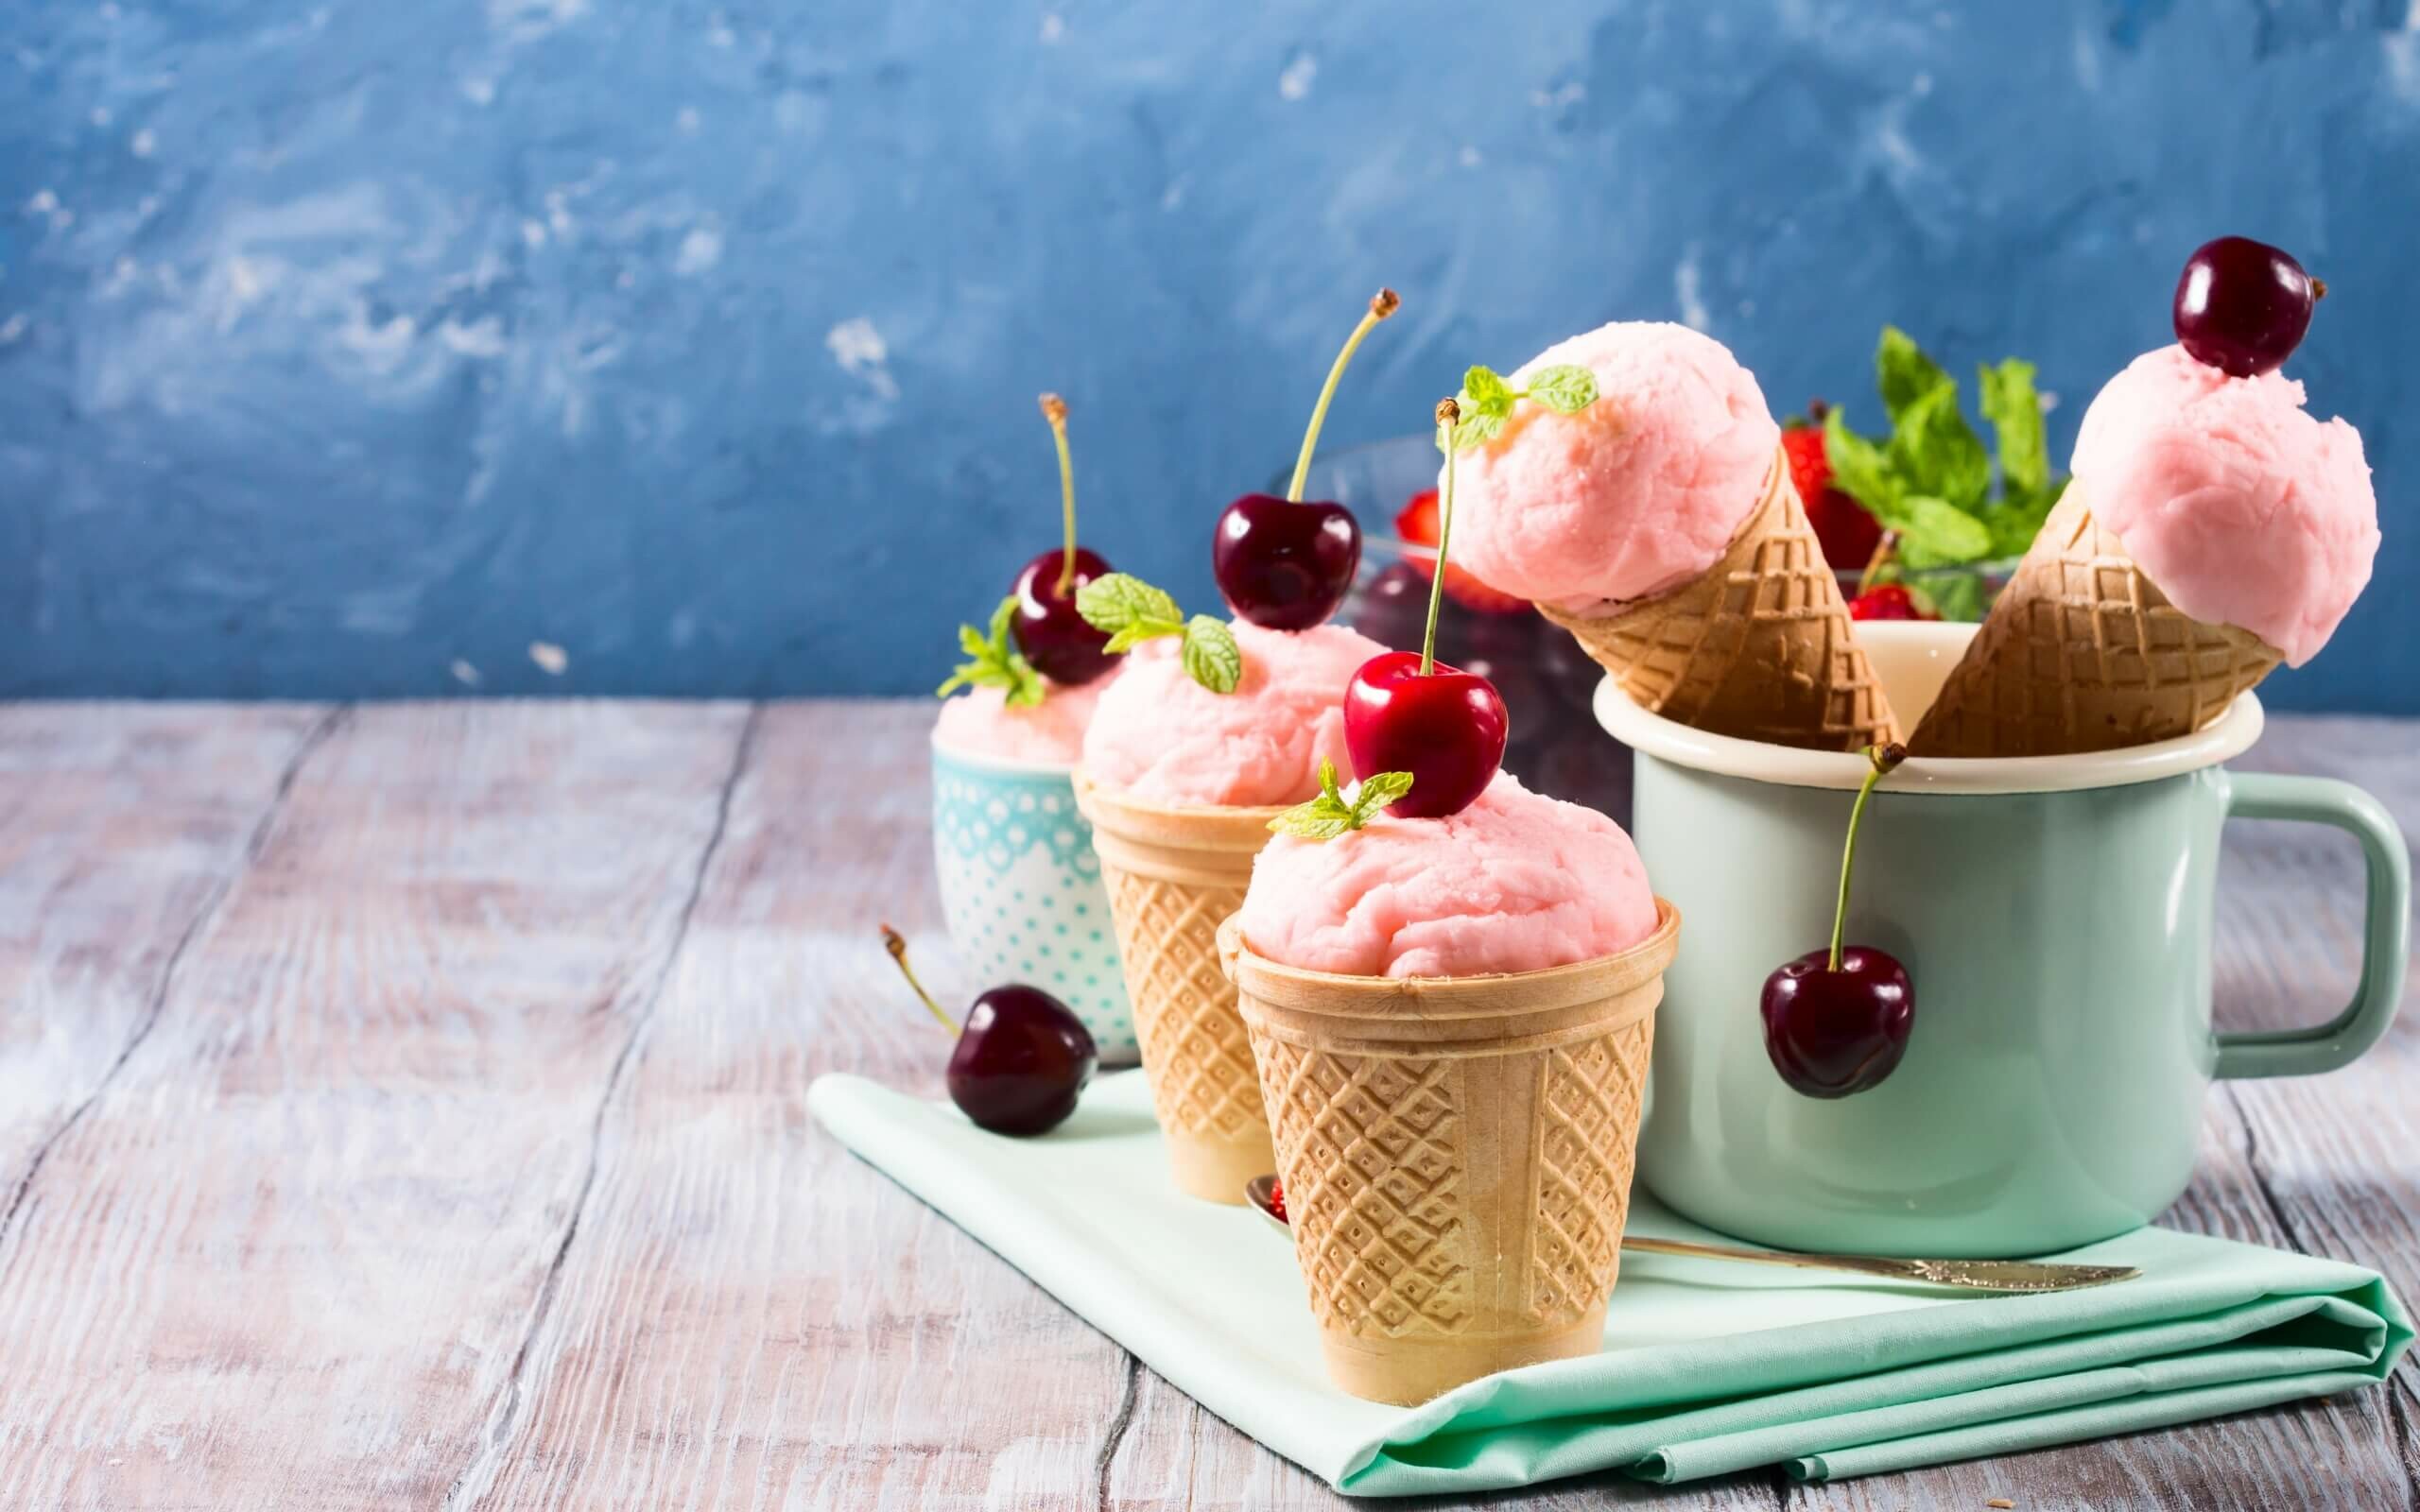 Ice Cream: May be served in dishes, for eating with a spoon, or licked from edible wafer cones. 2560x1600 HD Wallpaper.